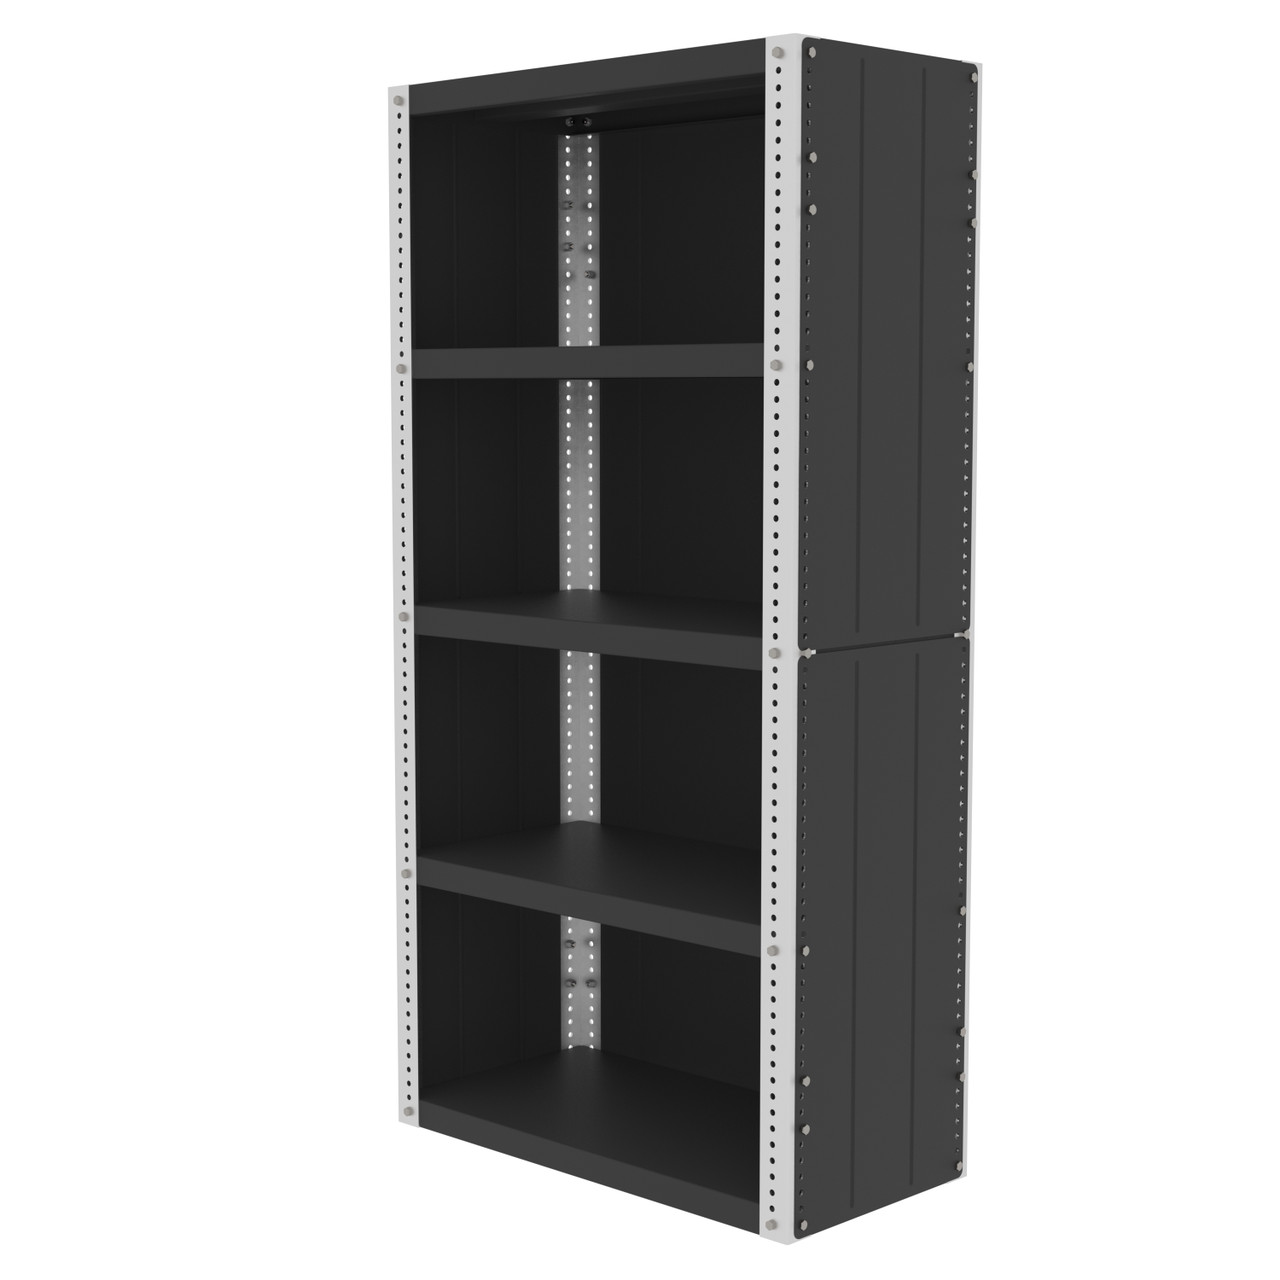 Valley Craft Preconfigured Enclosed Shelving Kit 36"W x 18"D x 72"H (CALL FOR BEST PRICING)